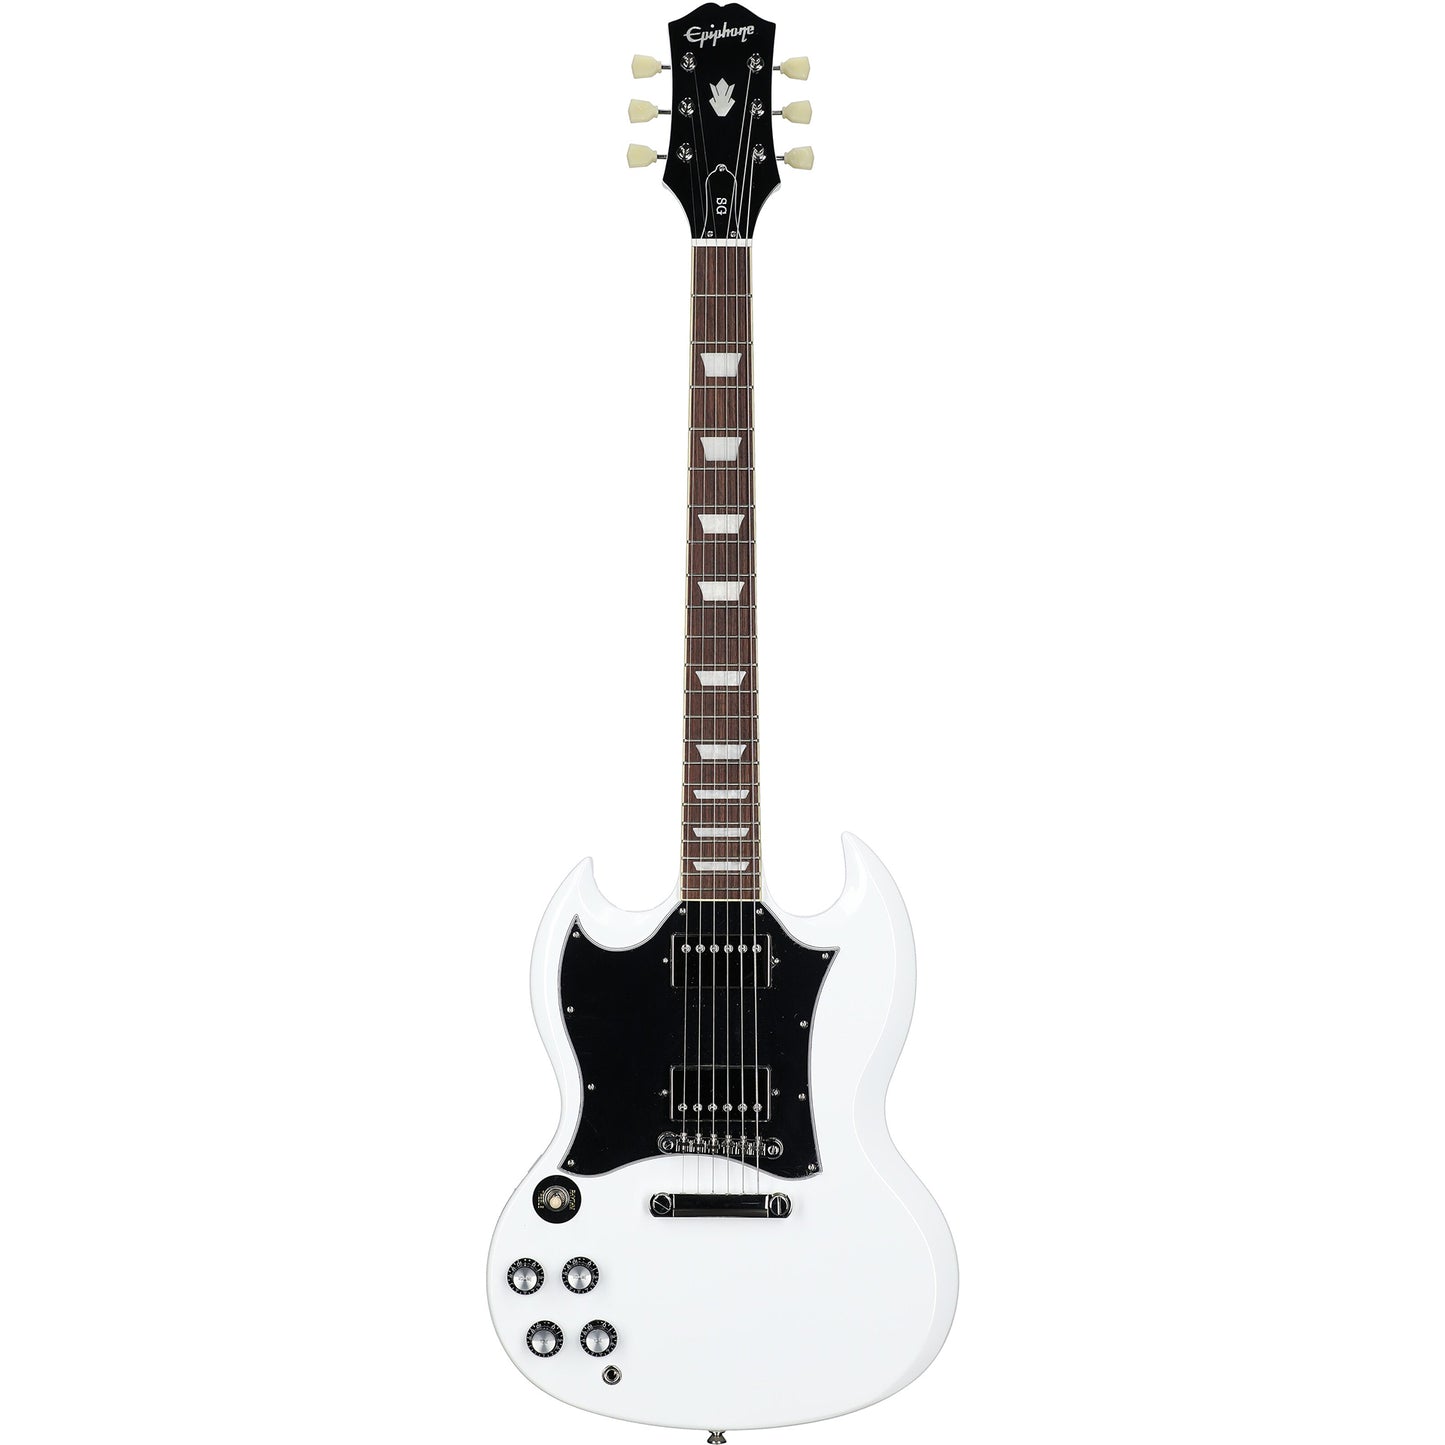 Epiphone SG Standard Left Hand Electric Guitar in Alpine White